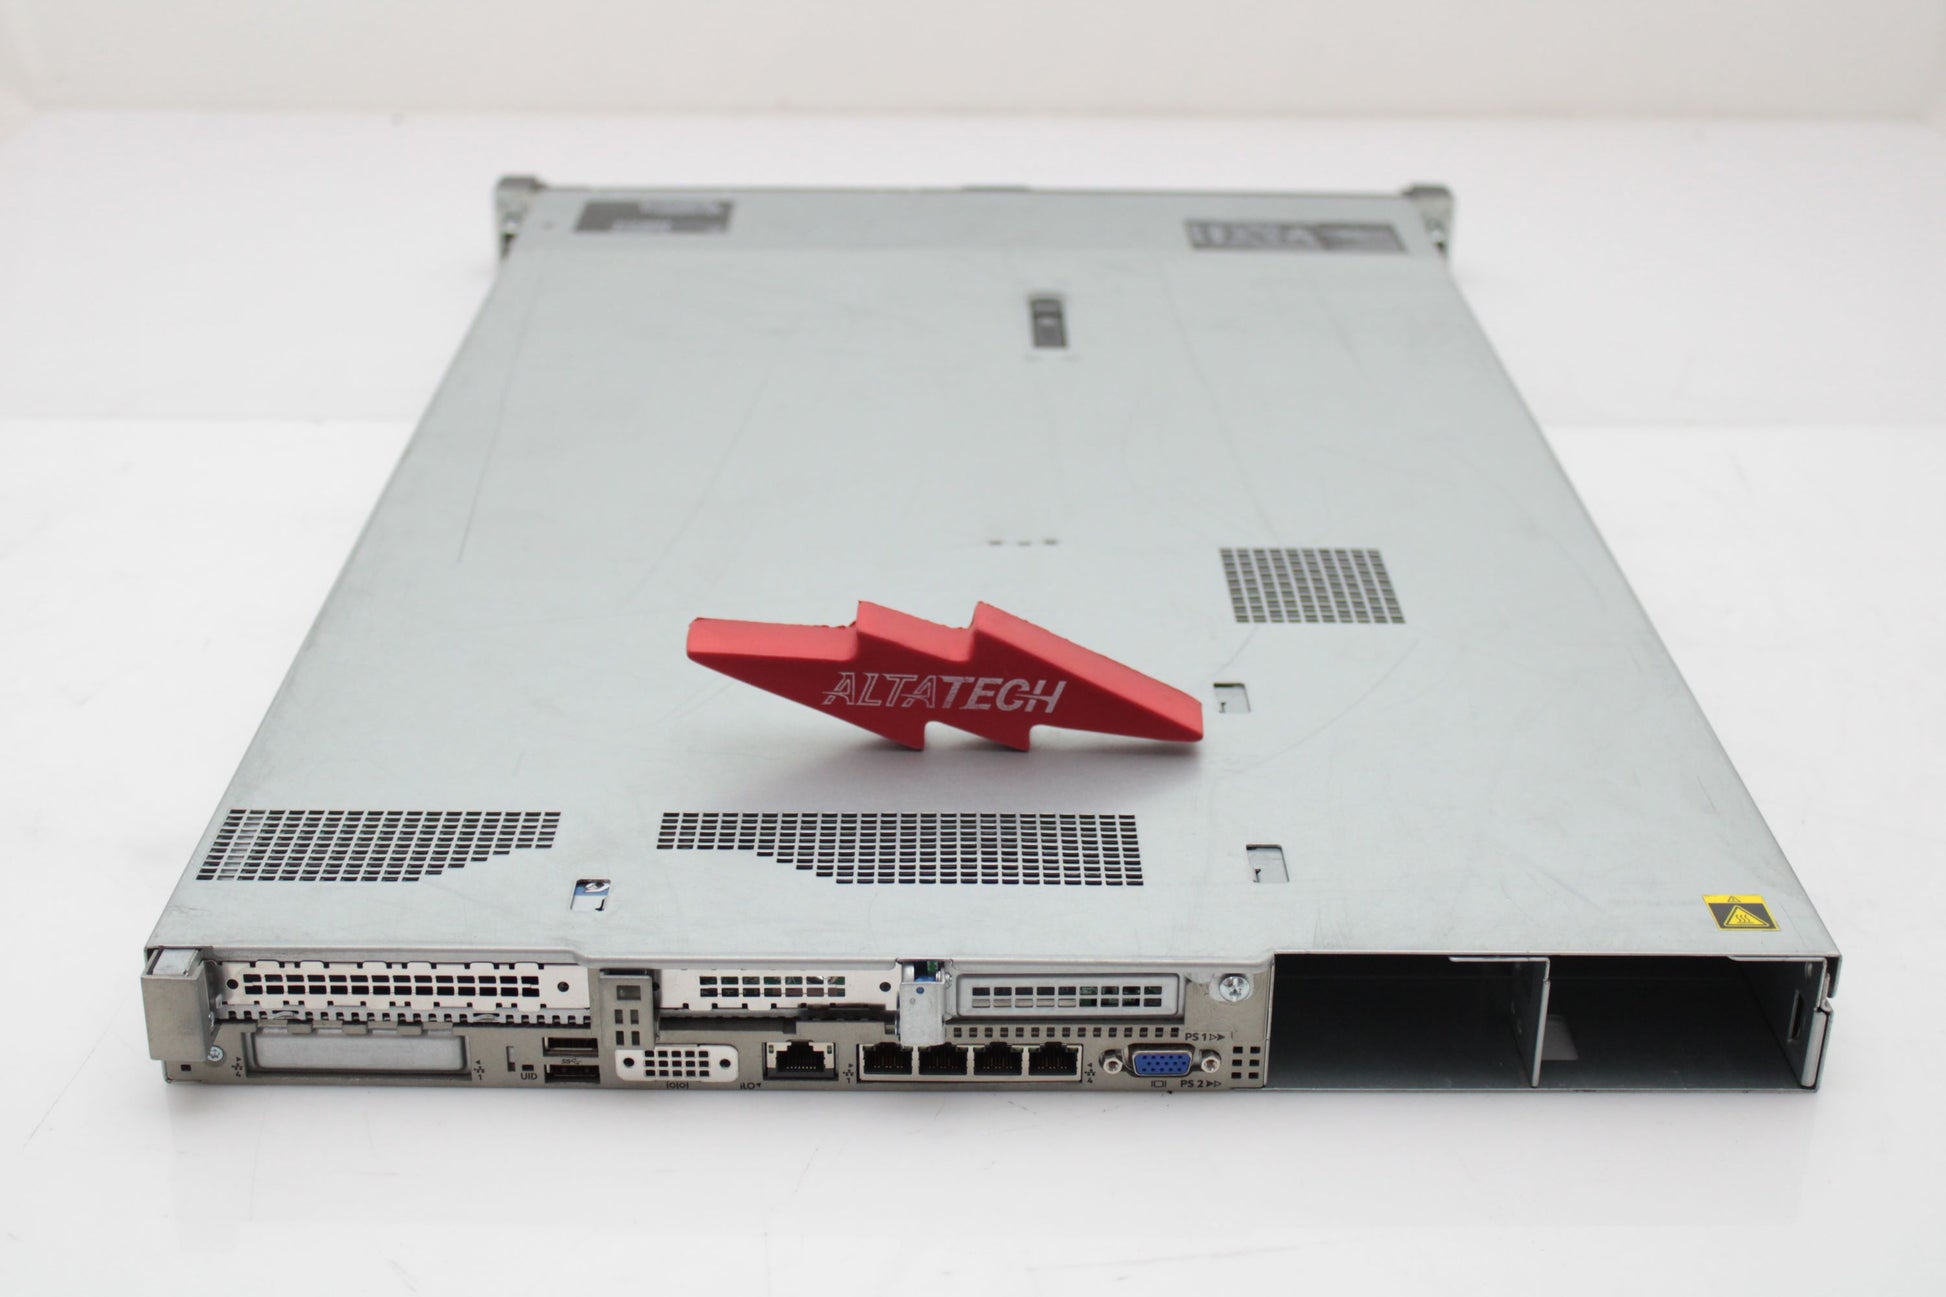 HP 869121-B21 DL360 GEN10 8SFF SPECIAL SERVER CTO, Used